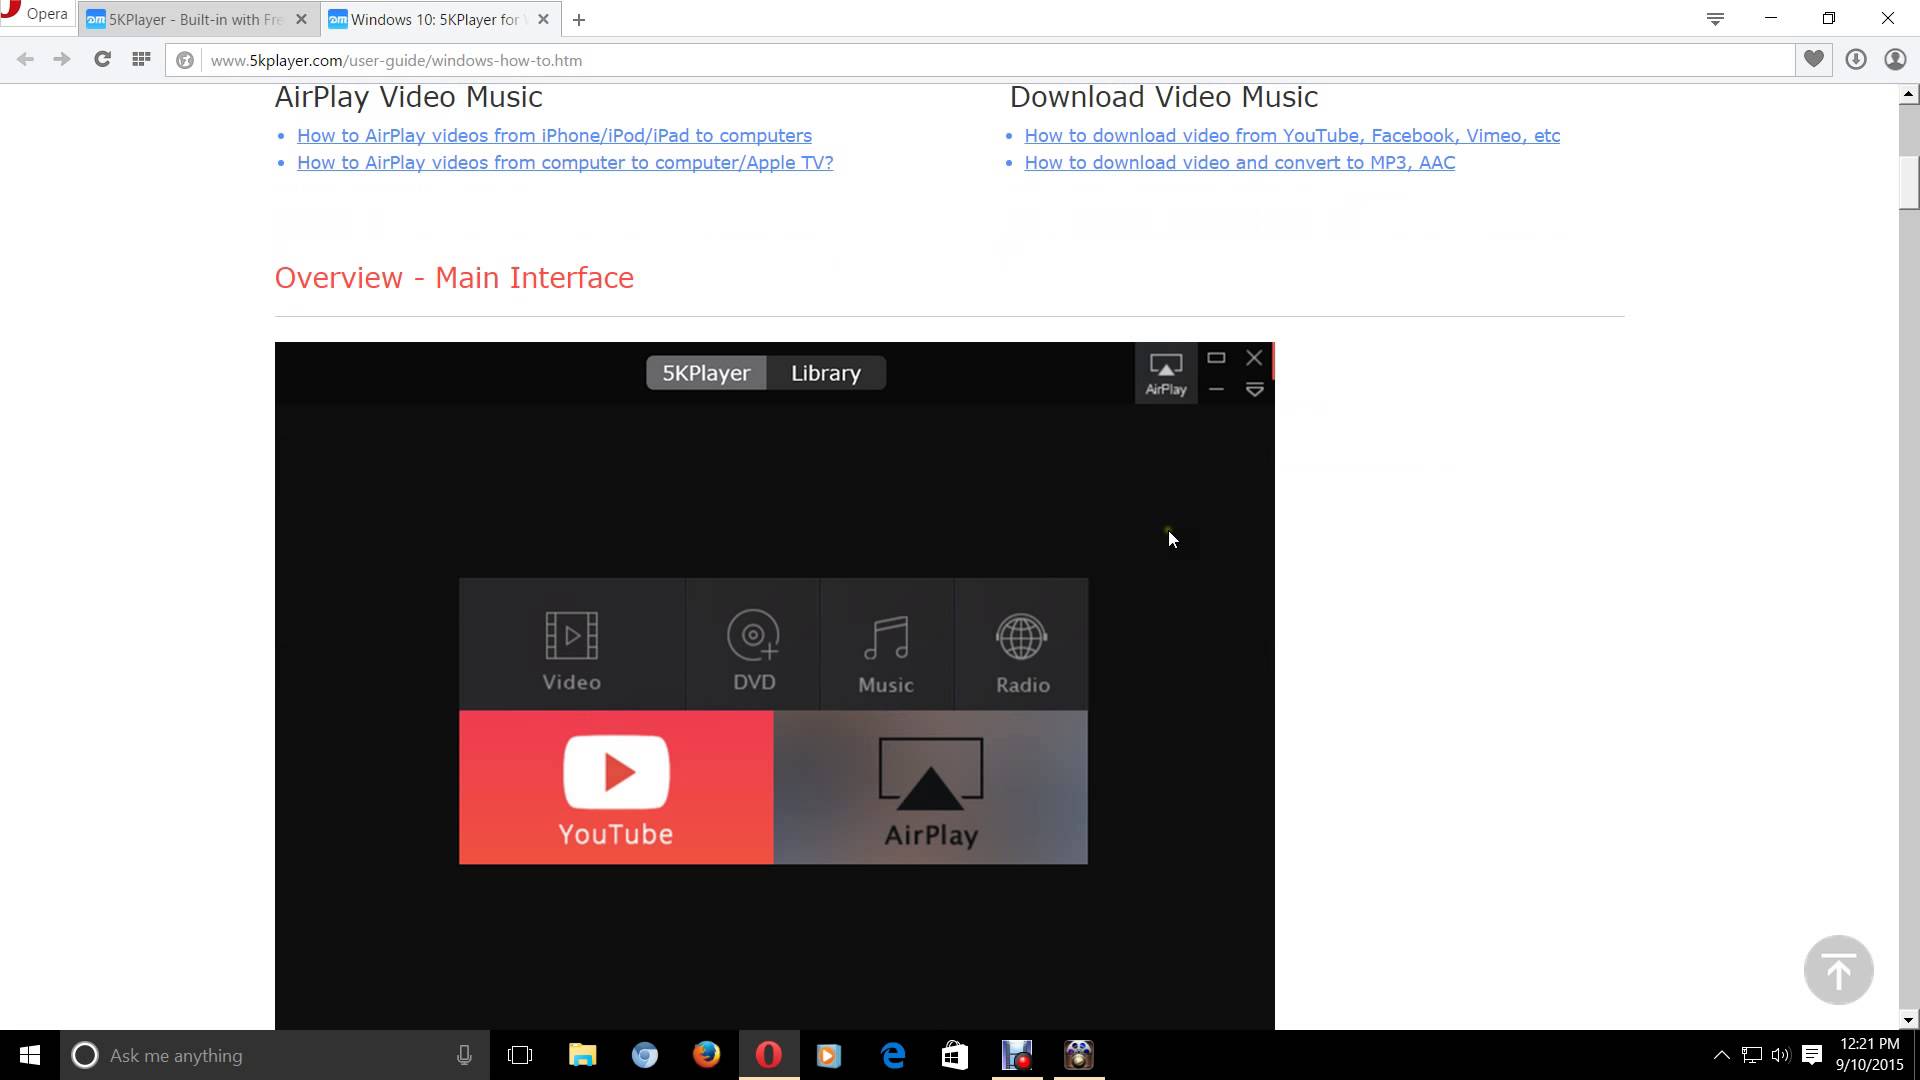 Youtube Video Player Icon